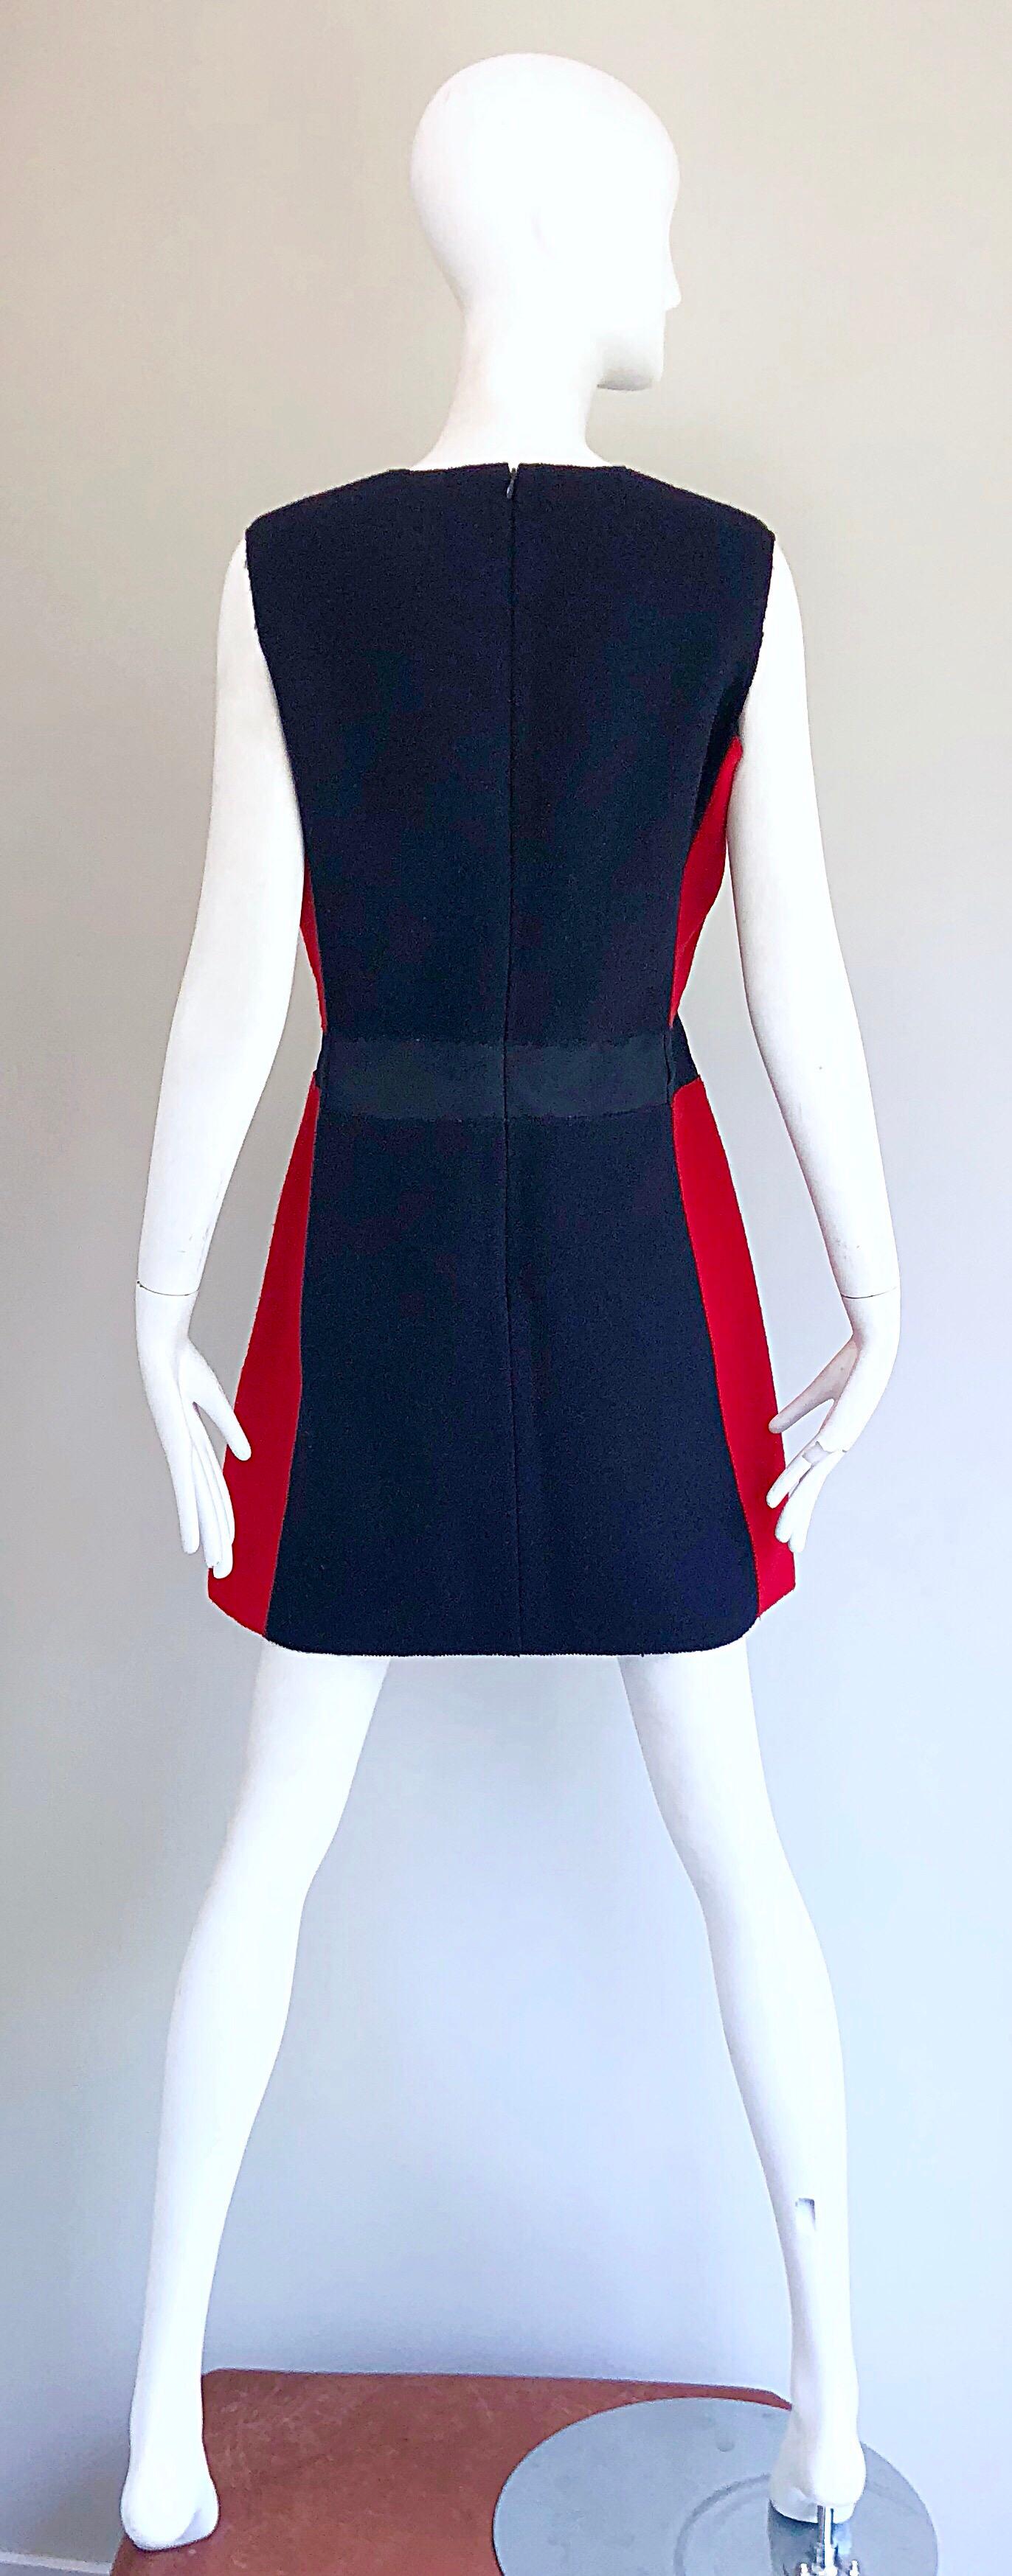 Miu Miu Early 2000s Navy Blue + Red Virgin Wool Size 44 US 8 A - Line Mod Dress For Sale 2